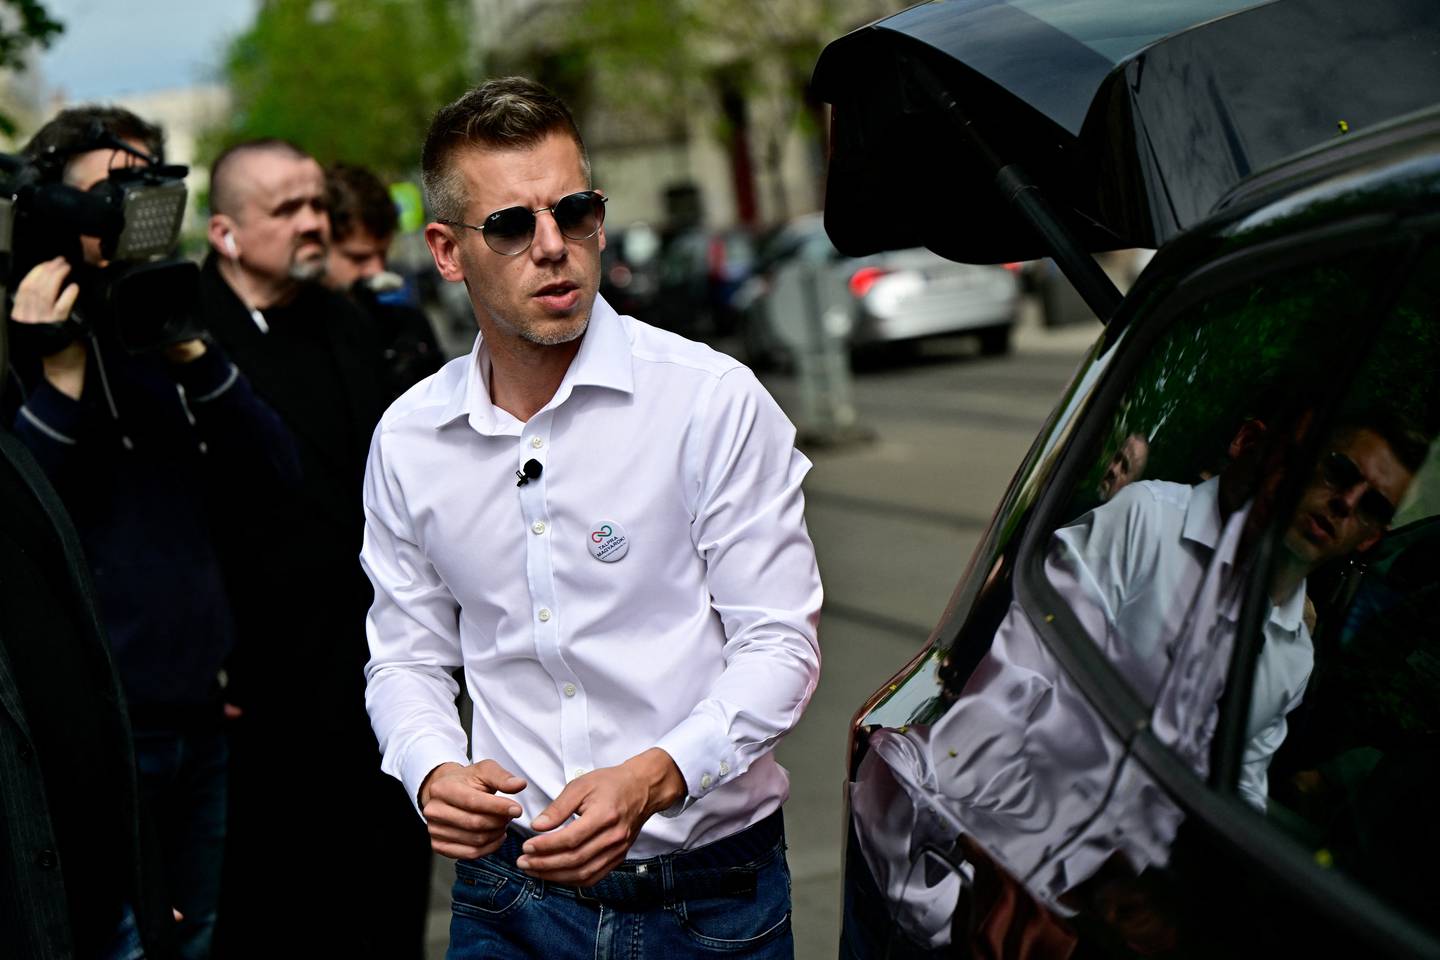 Peter Magyar, a lawyer and businessman formerly close to Hungary's ruling nationalist government, walks next to a car, in Budapest, Hungary, April 6, 2024. REUTERS/Marton Monus